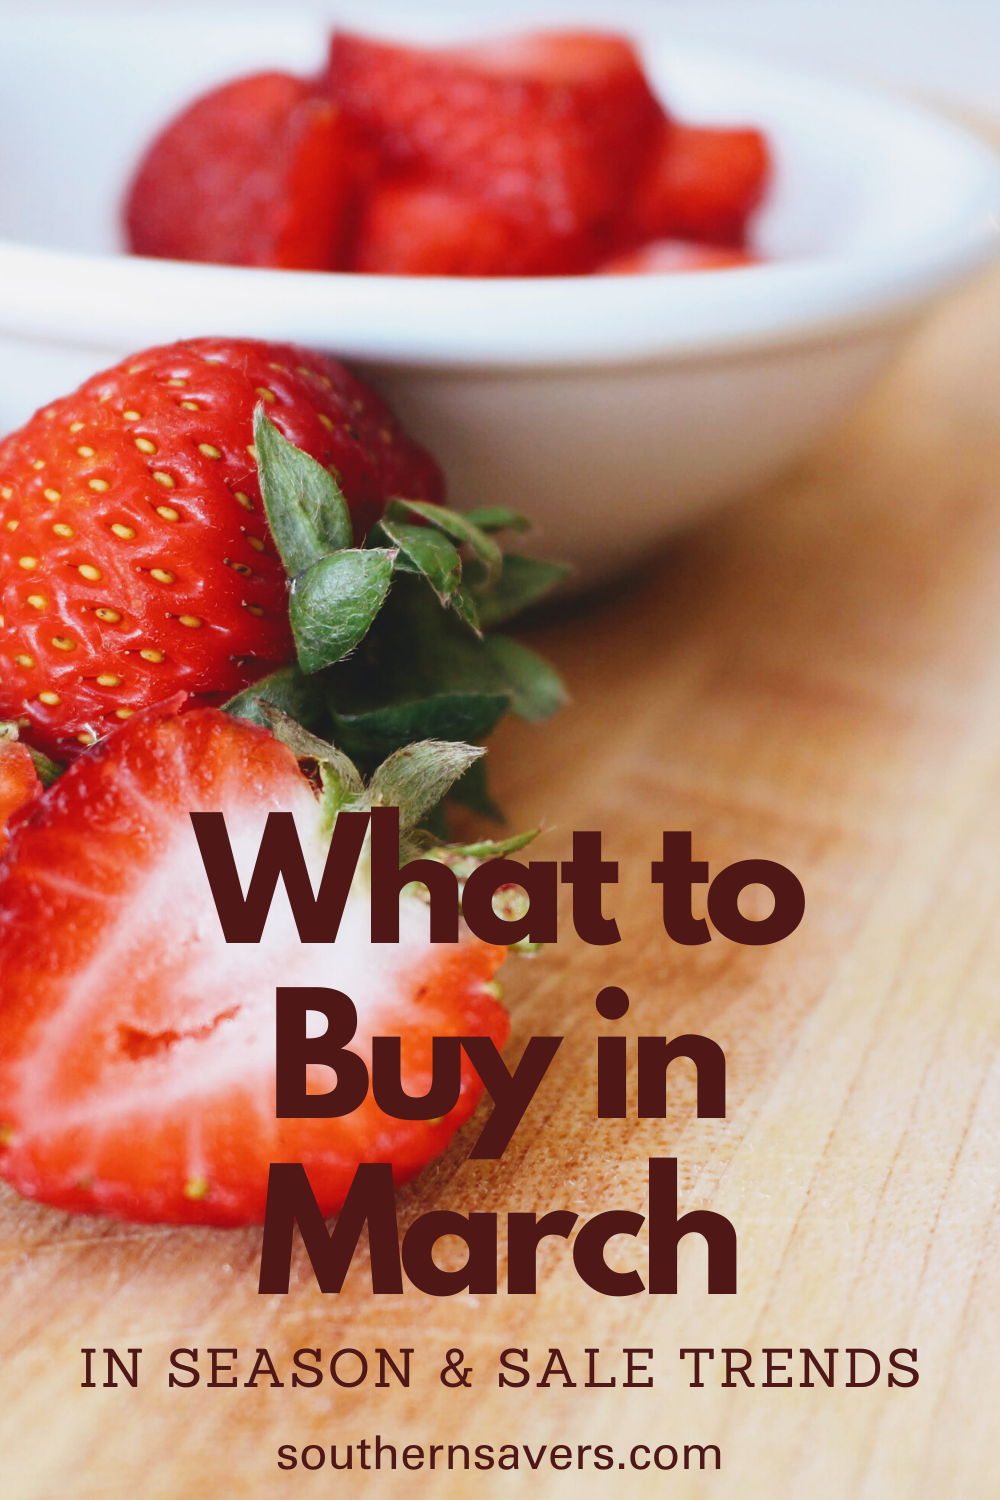 Make the most of your budget by staying on top of sale trends for each season. Here's what to buy in March to get the best produce and deals!